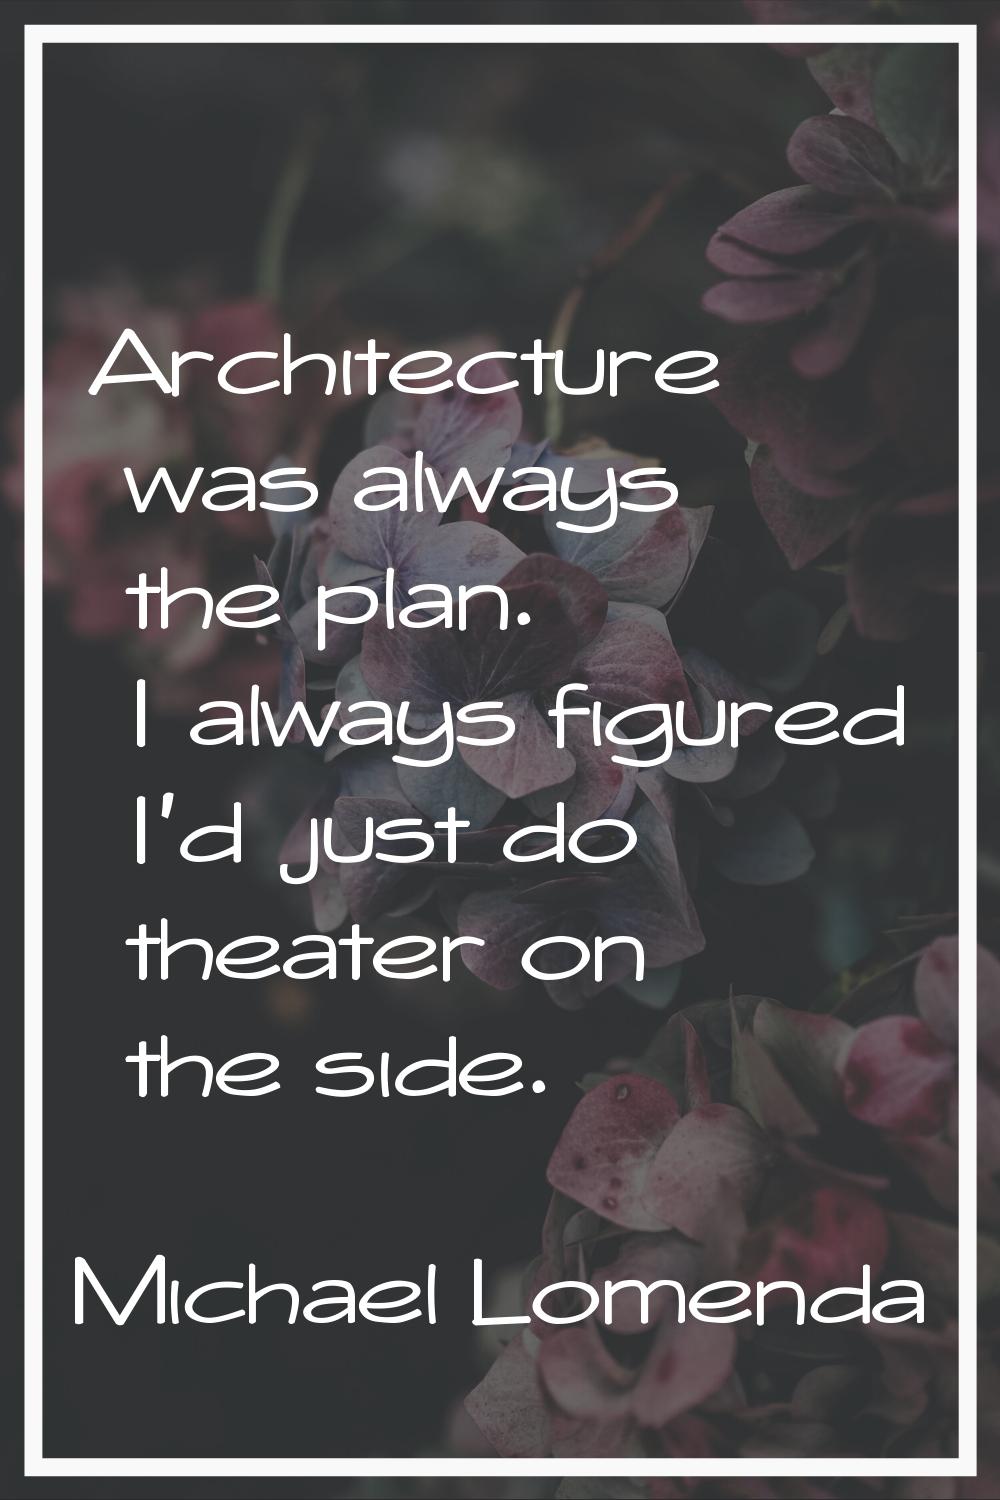 Architecture was always the plan. I always figured I'd just do theater on the side.